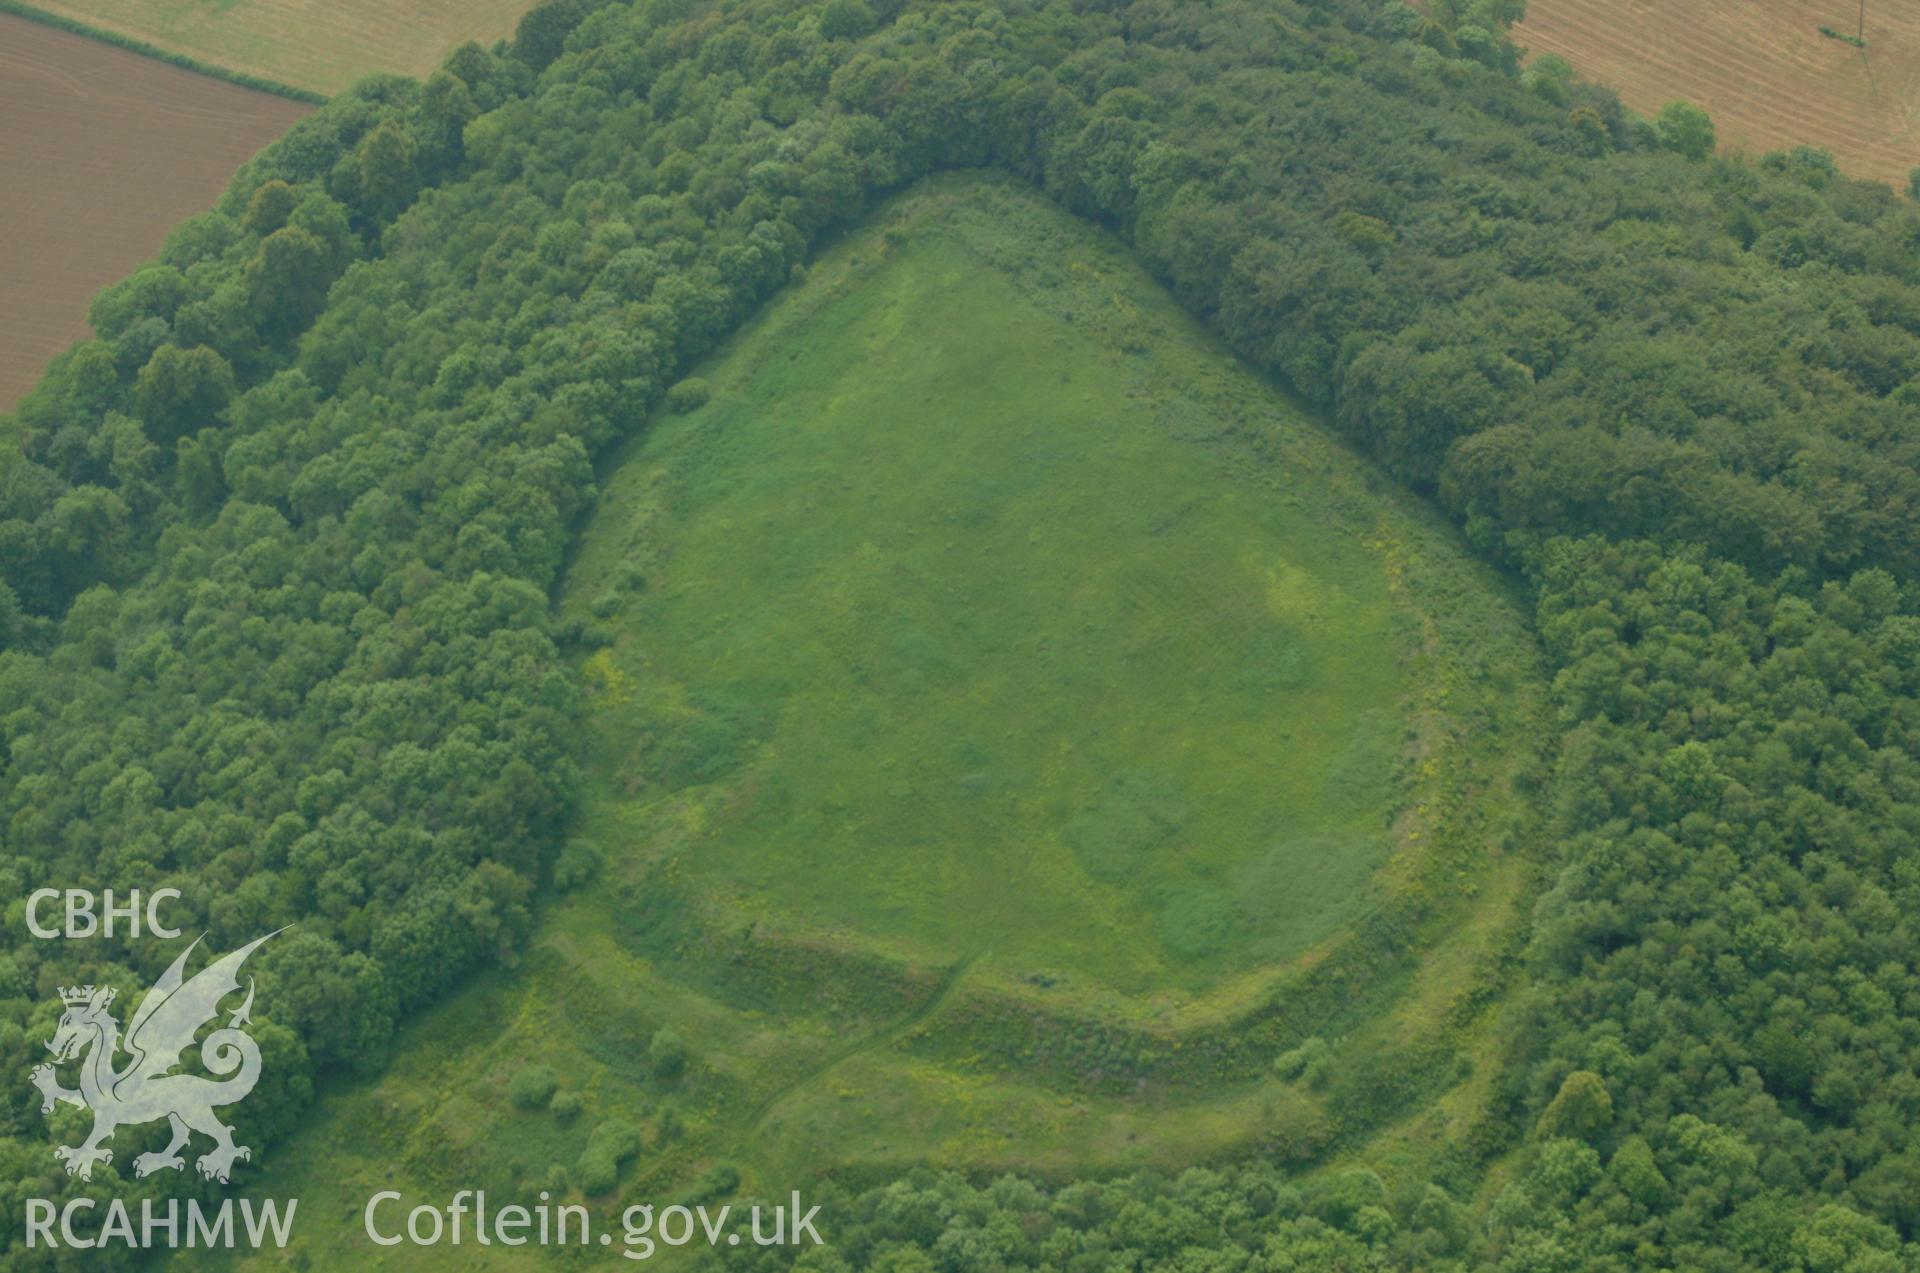 RCAHMW colour oblique aerial photograph of Llanmelin Wood Hillfort taken on 26/05/2004 by Toby Driver